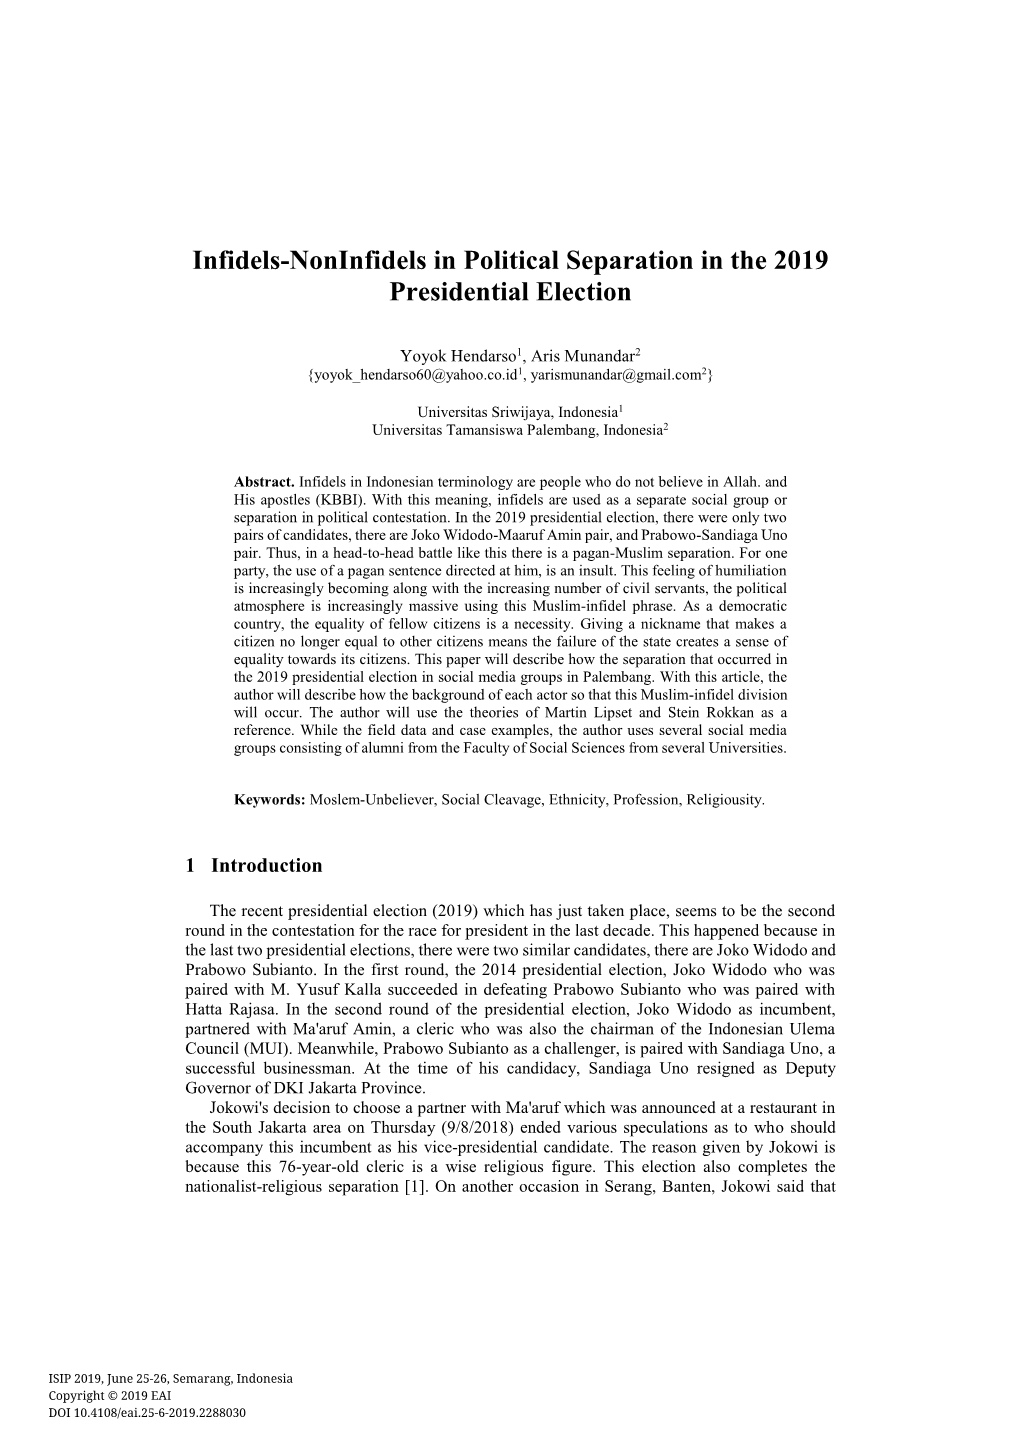 Infidels-Noninfidels in Political Separation in the 2019 Presidential Election